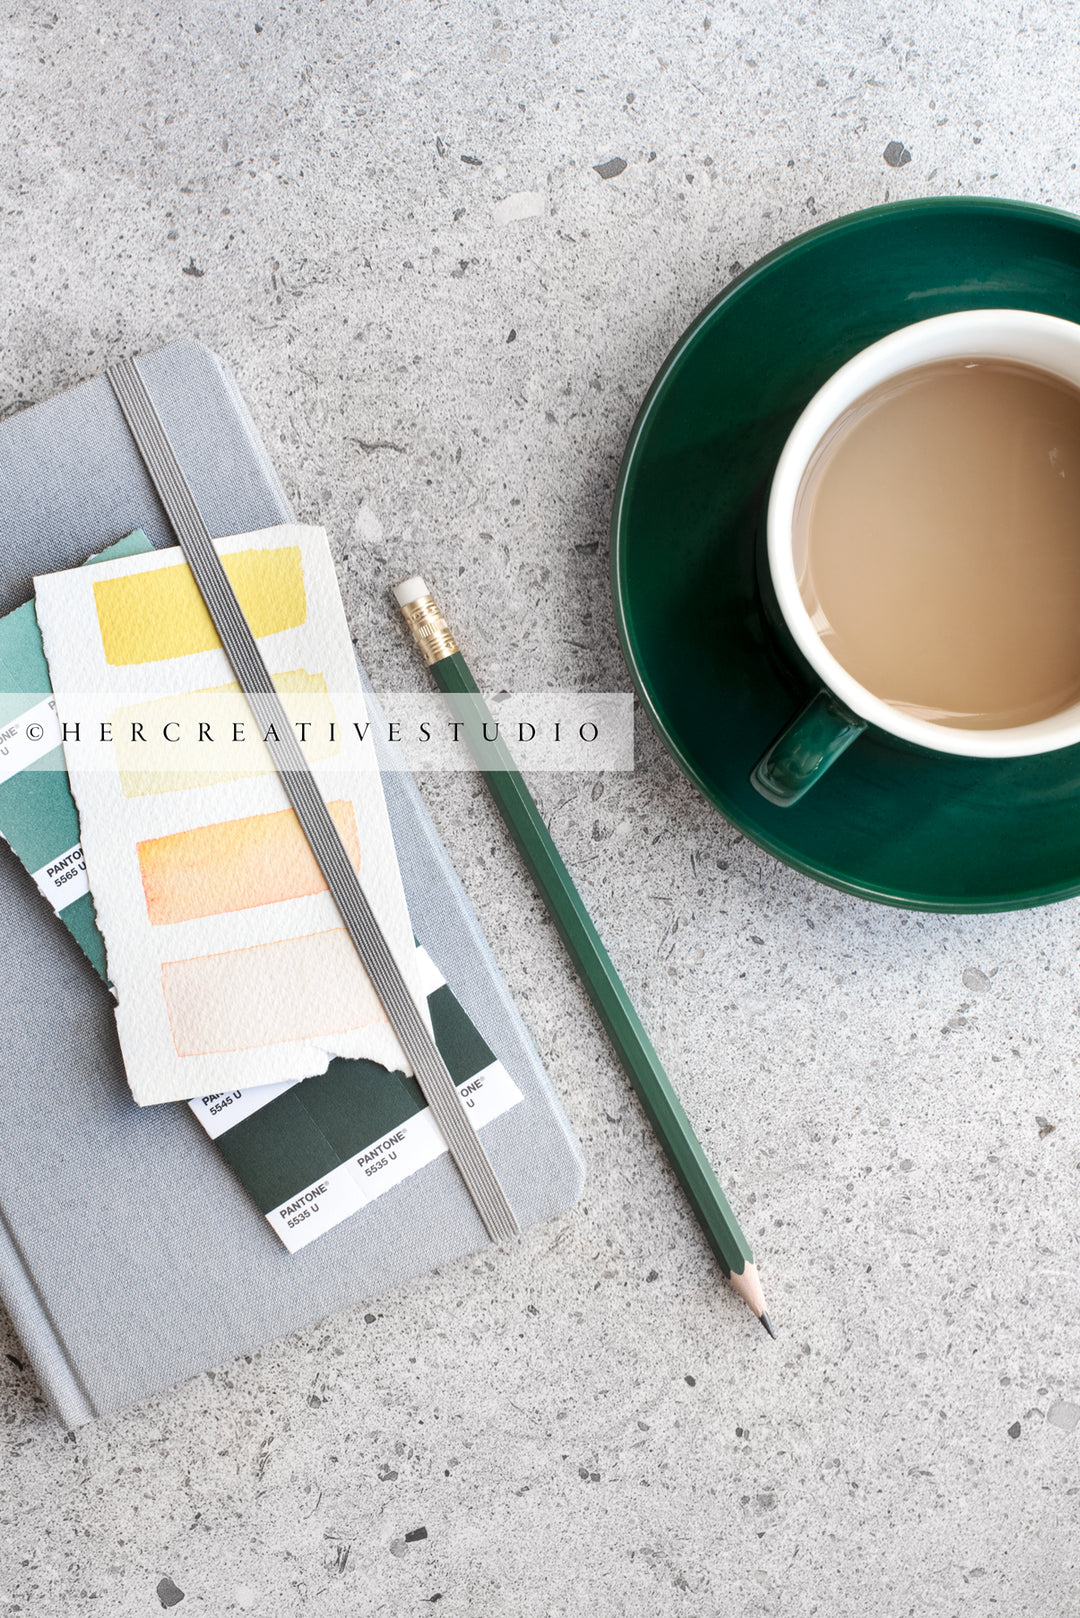 Notebook, Pencil & Coffee. Styled Stock Image